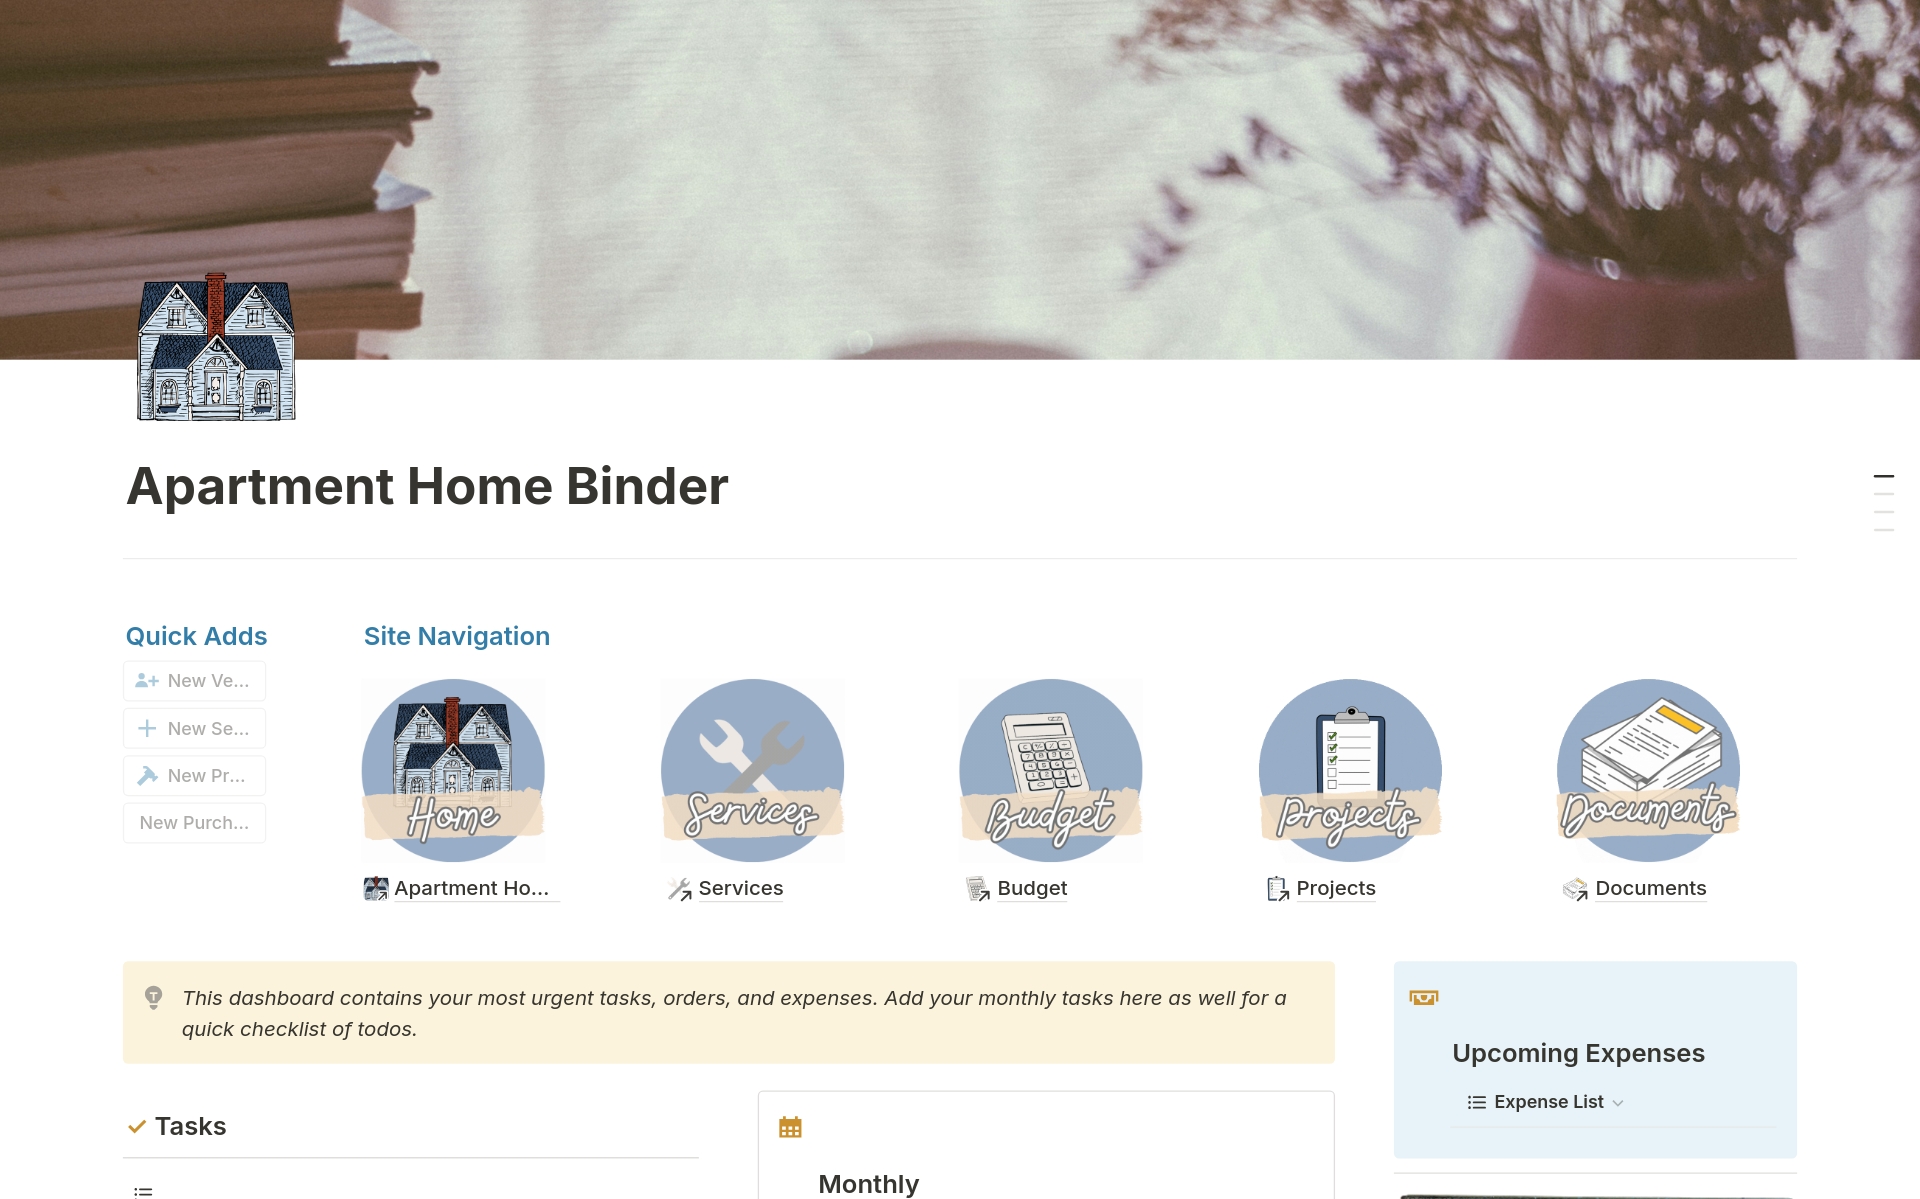 Introducing the Ultimate Apartment Home Binder and condo notion planner —a meticulously crafted household maintenance binder designed to streamline expenses, supplies, warranties, habits, budget, and more. It is the perfect tool for taking care of your home.